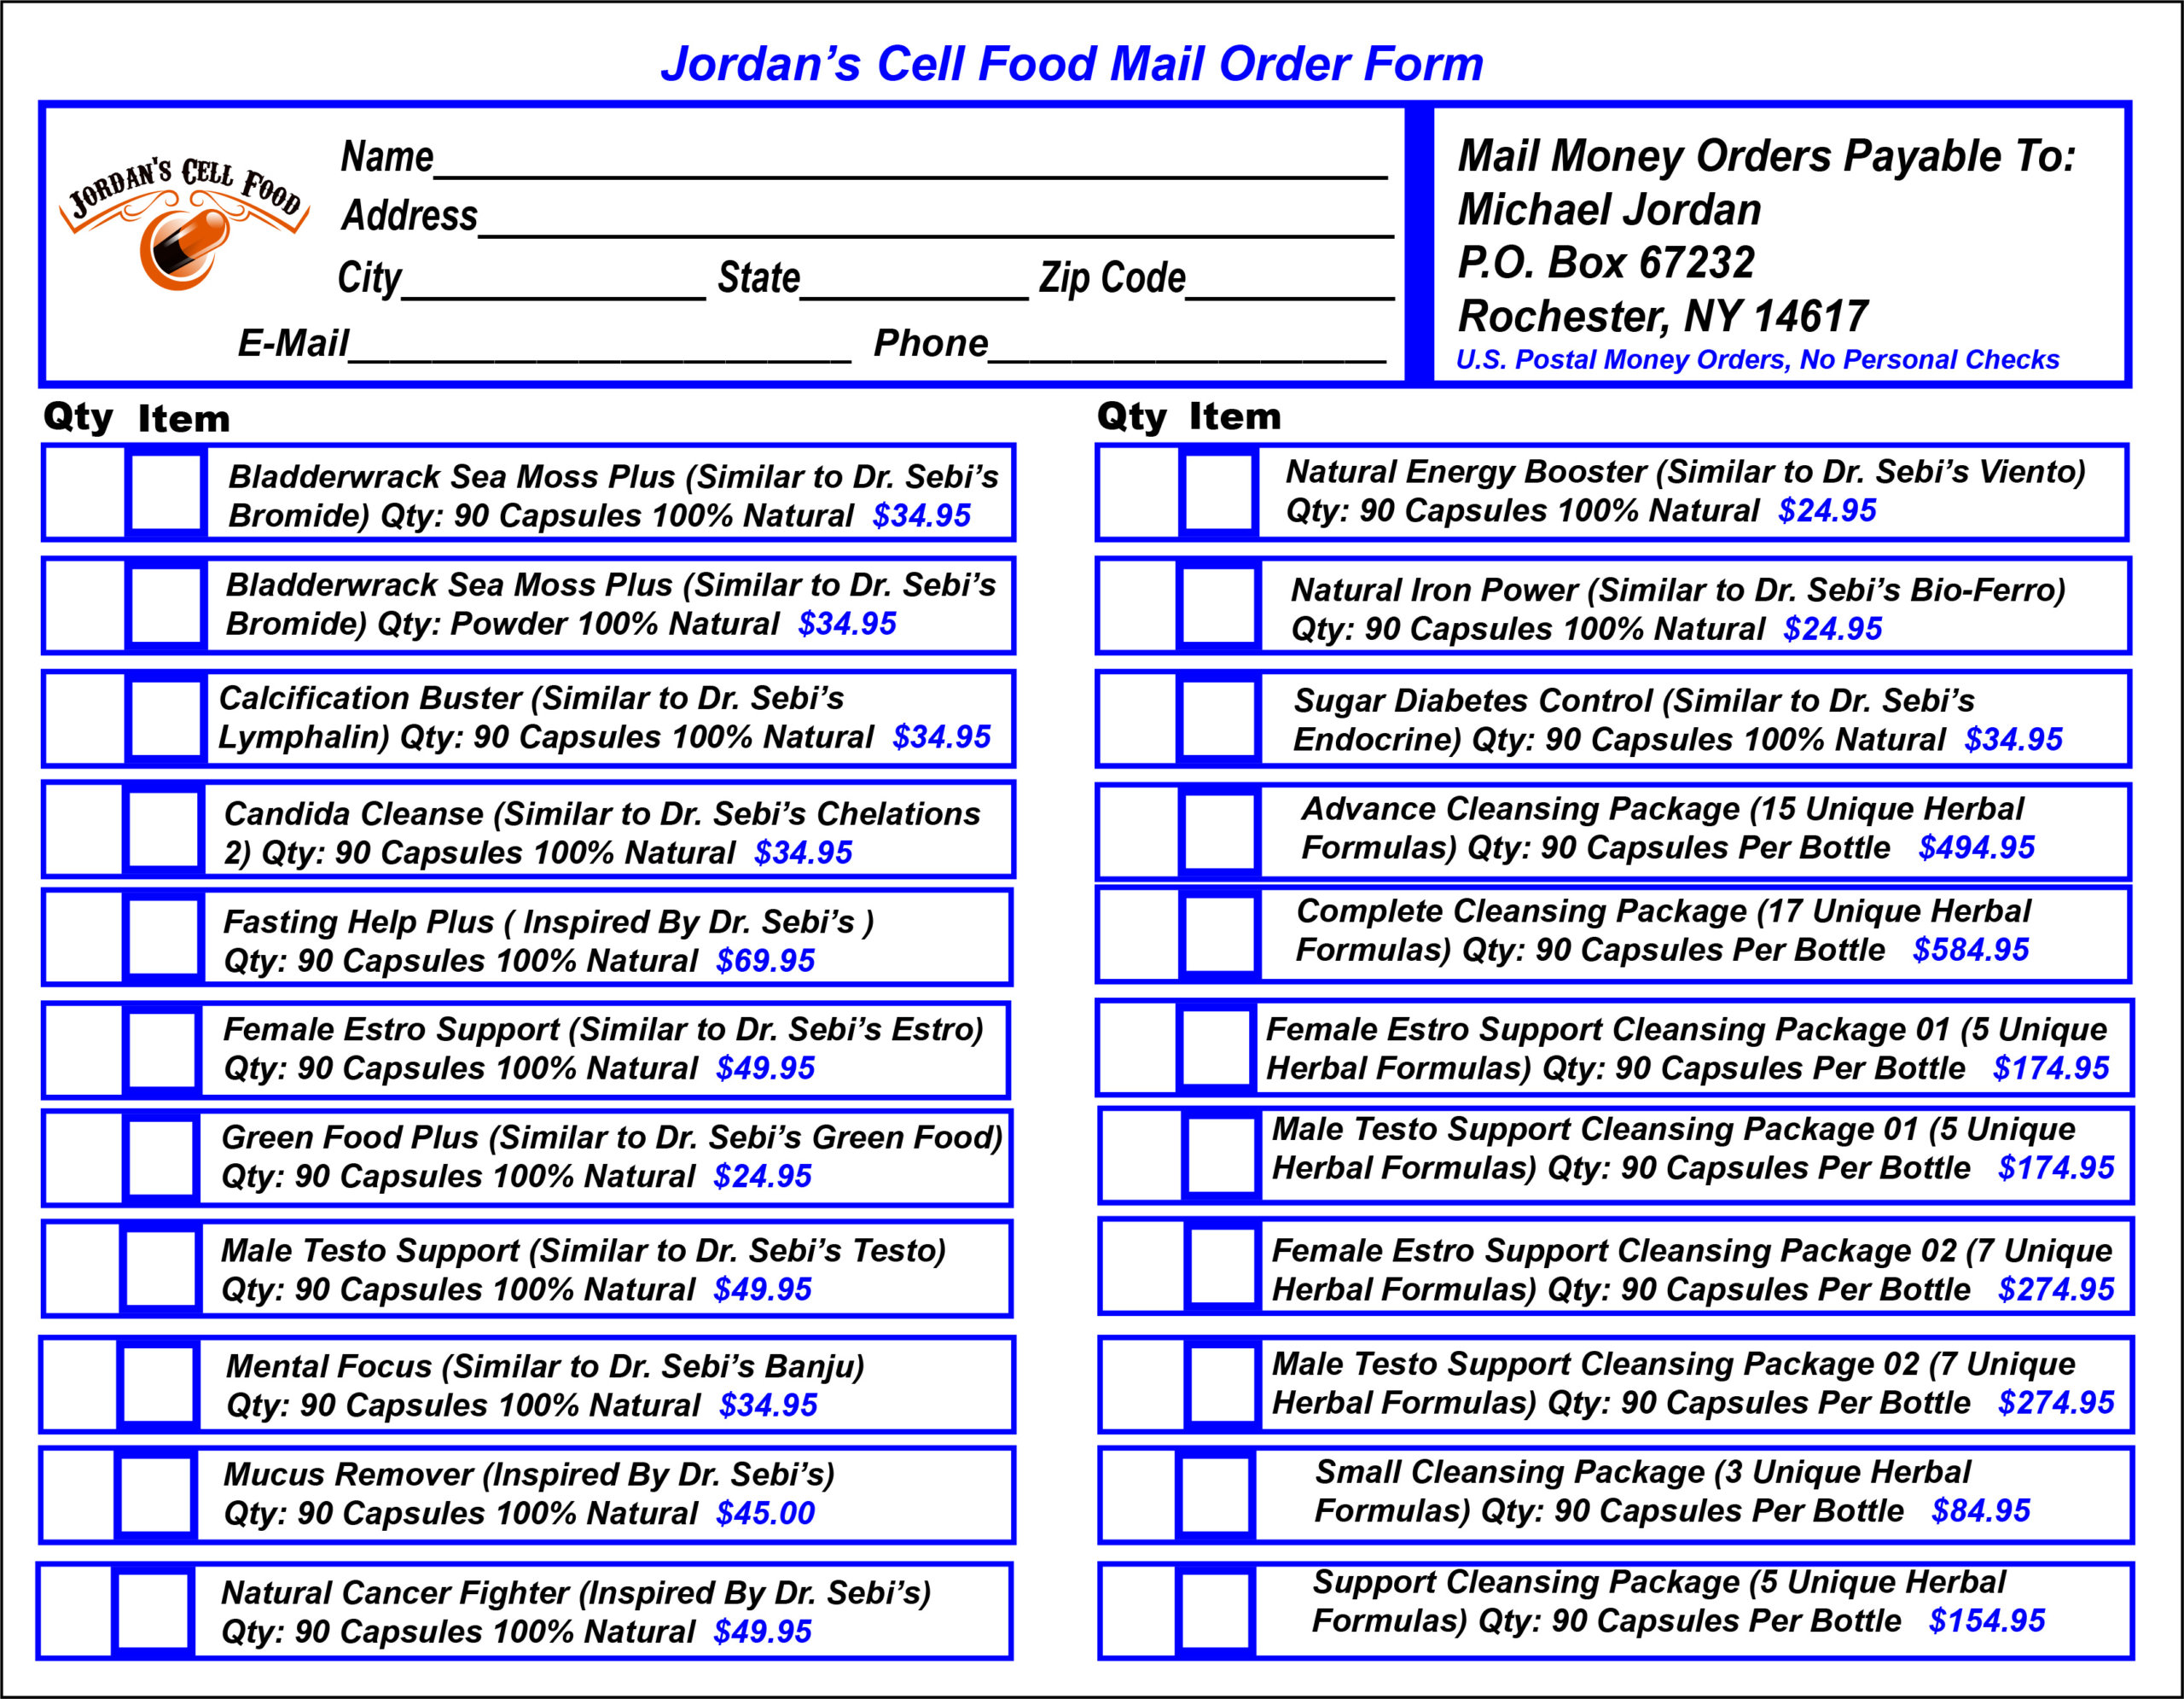 Jordan's Cell Food Mail Form 12